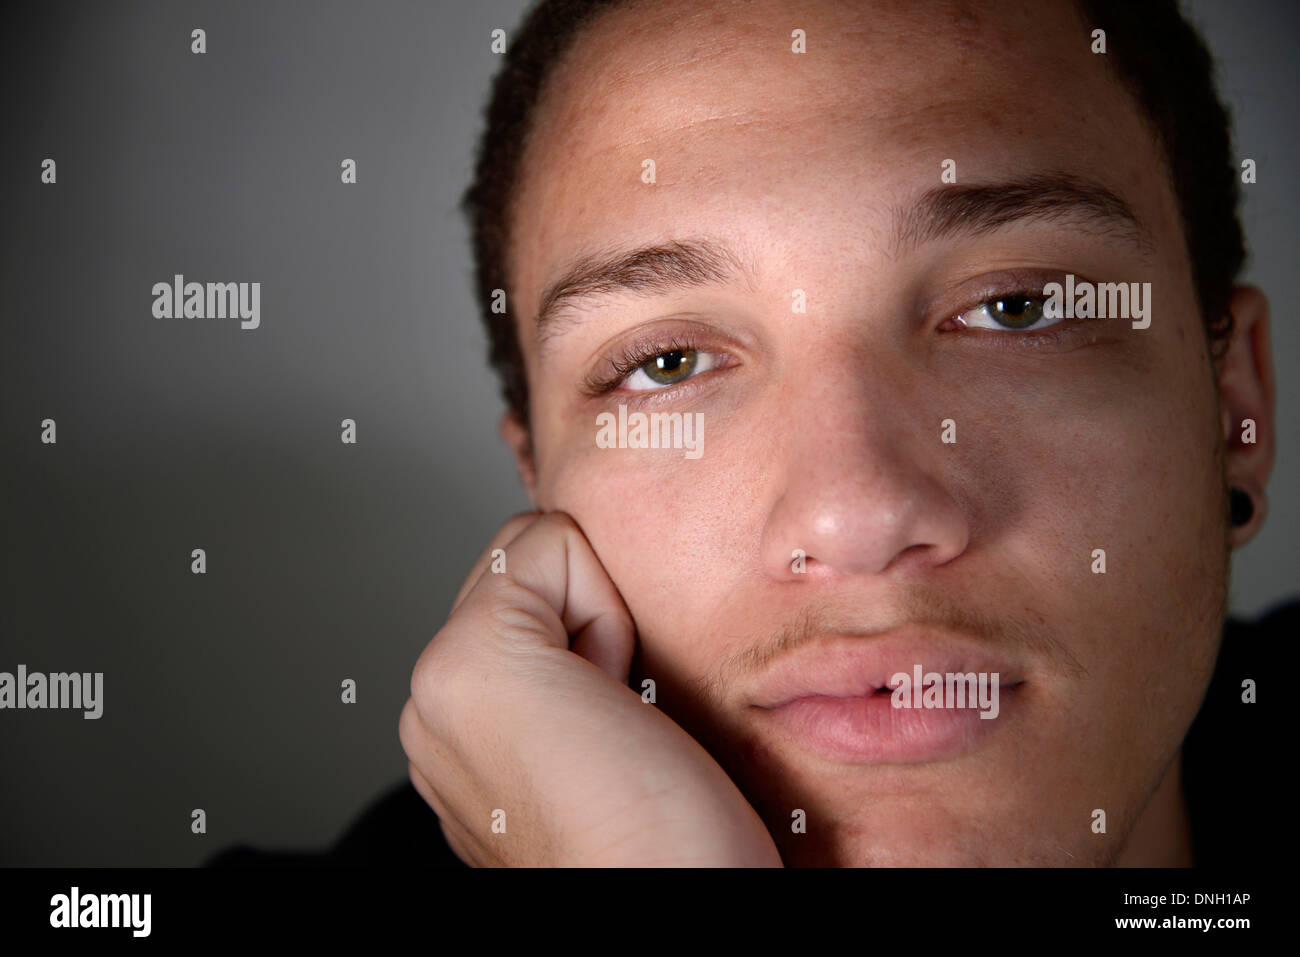 A male teenager and recent graduate. Stock Photo